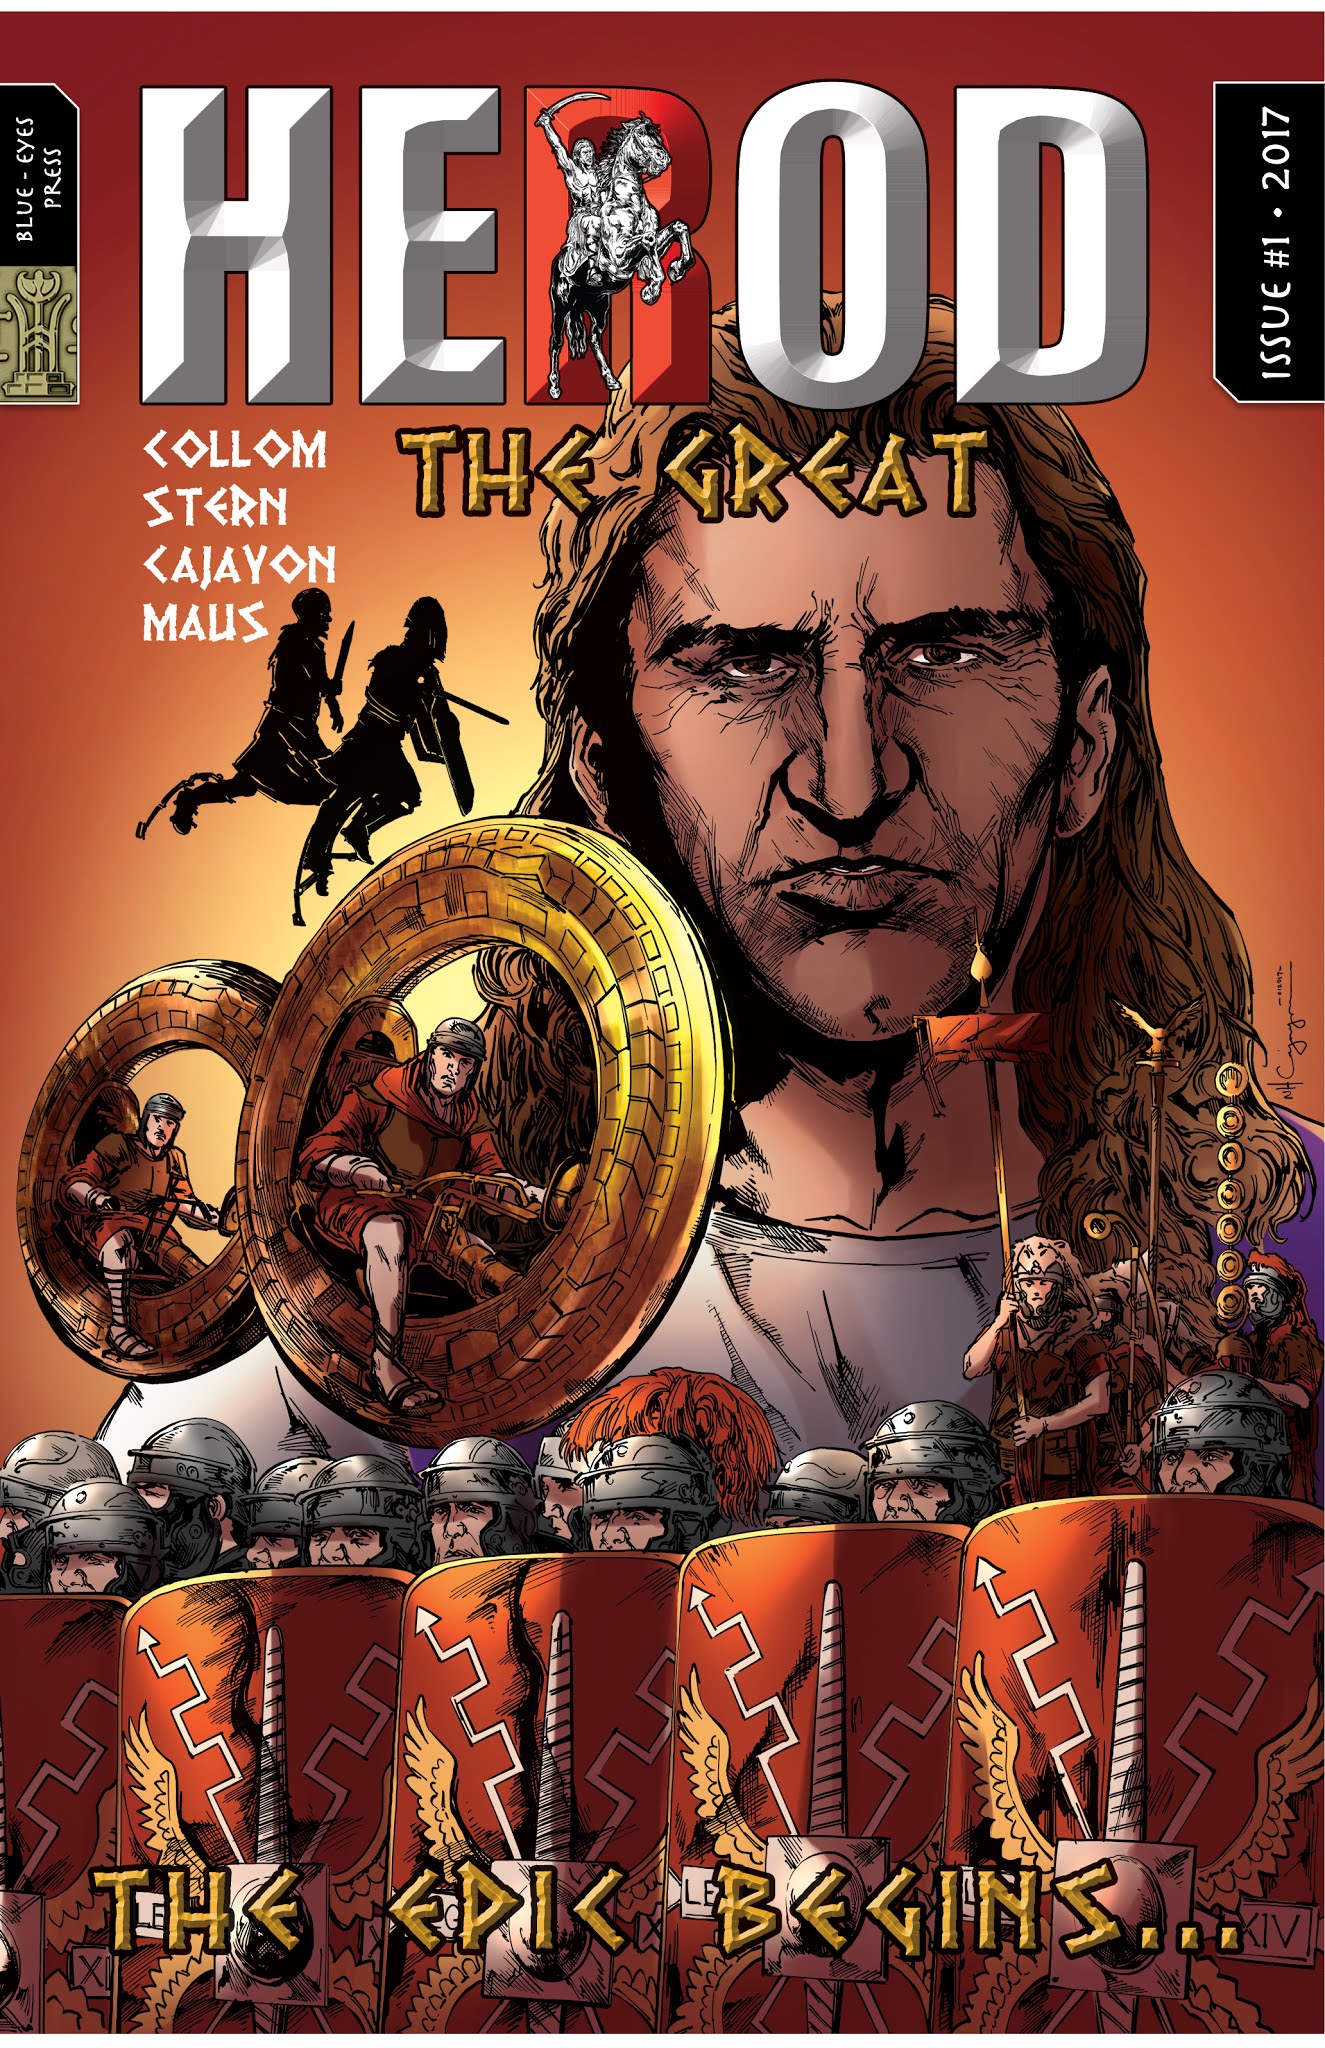 Read online Herod the Great comic -  Issue #1 - 1